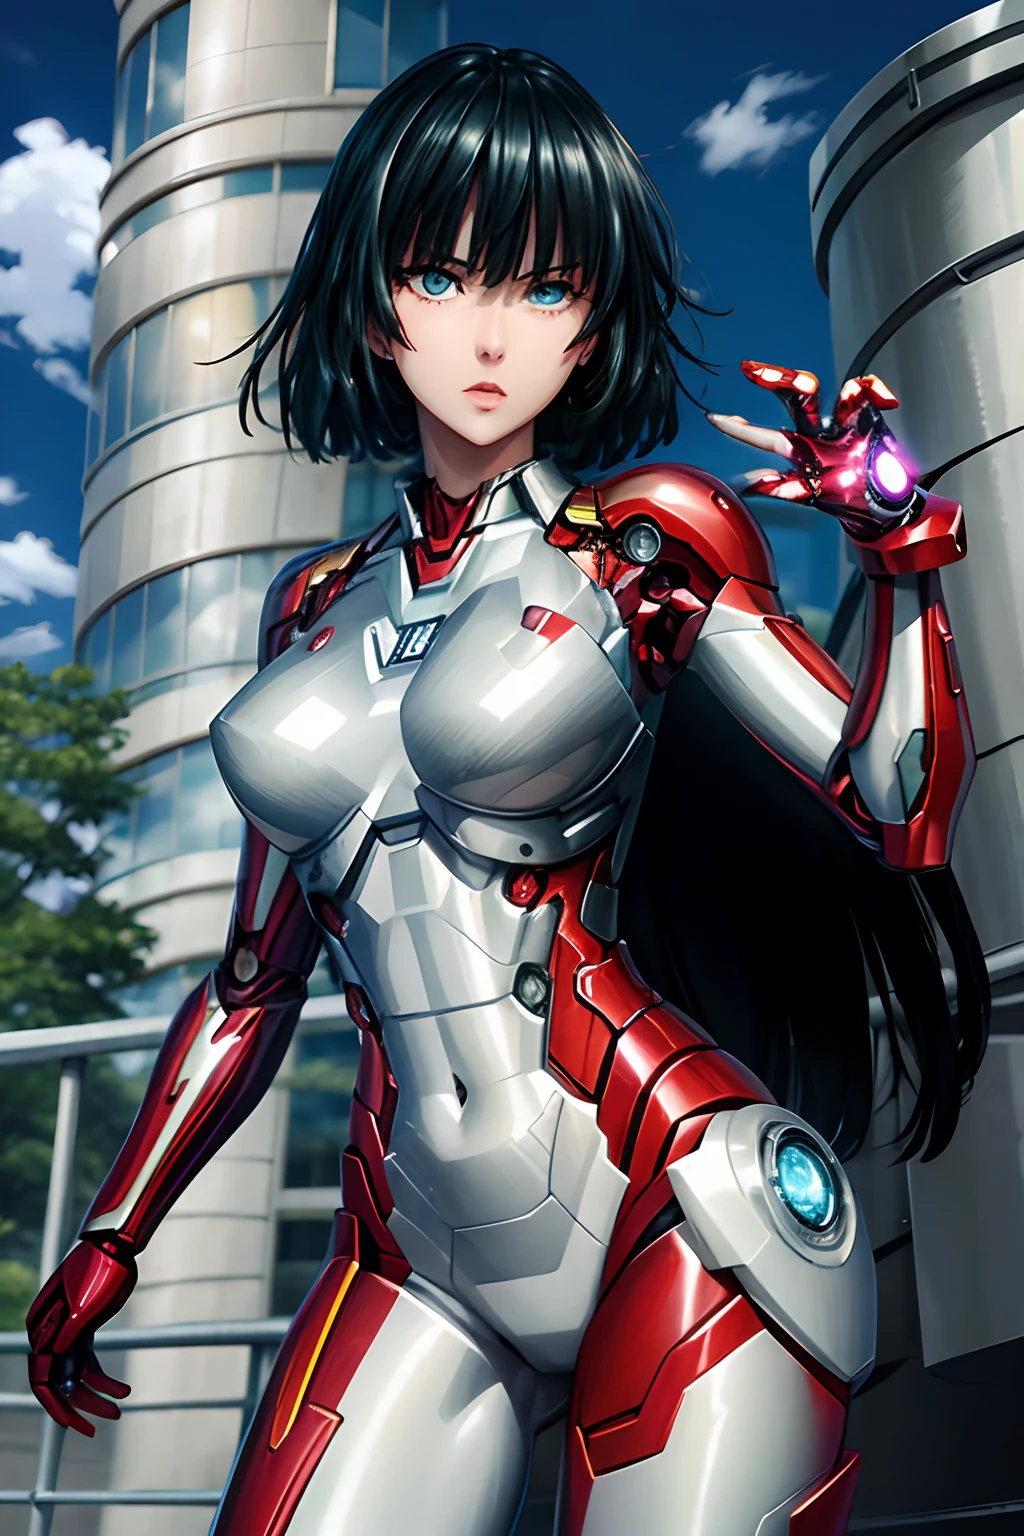 Fubuki, a sexy and attractive woman inspired by Iron Man with a shiny Iron Man robot. She dresses with sensuality and confidence, perfectly interpreting the strength and charisma of Iron Man.